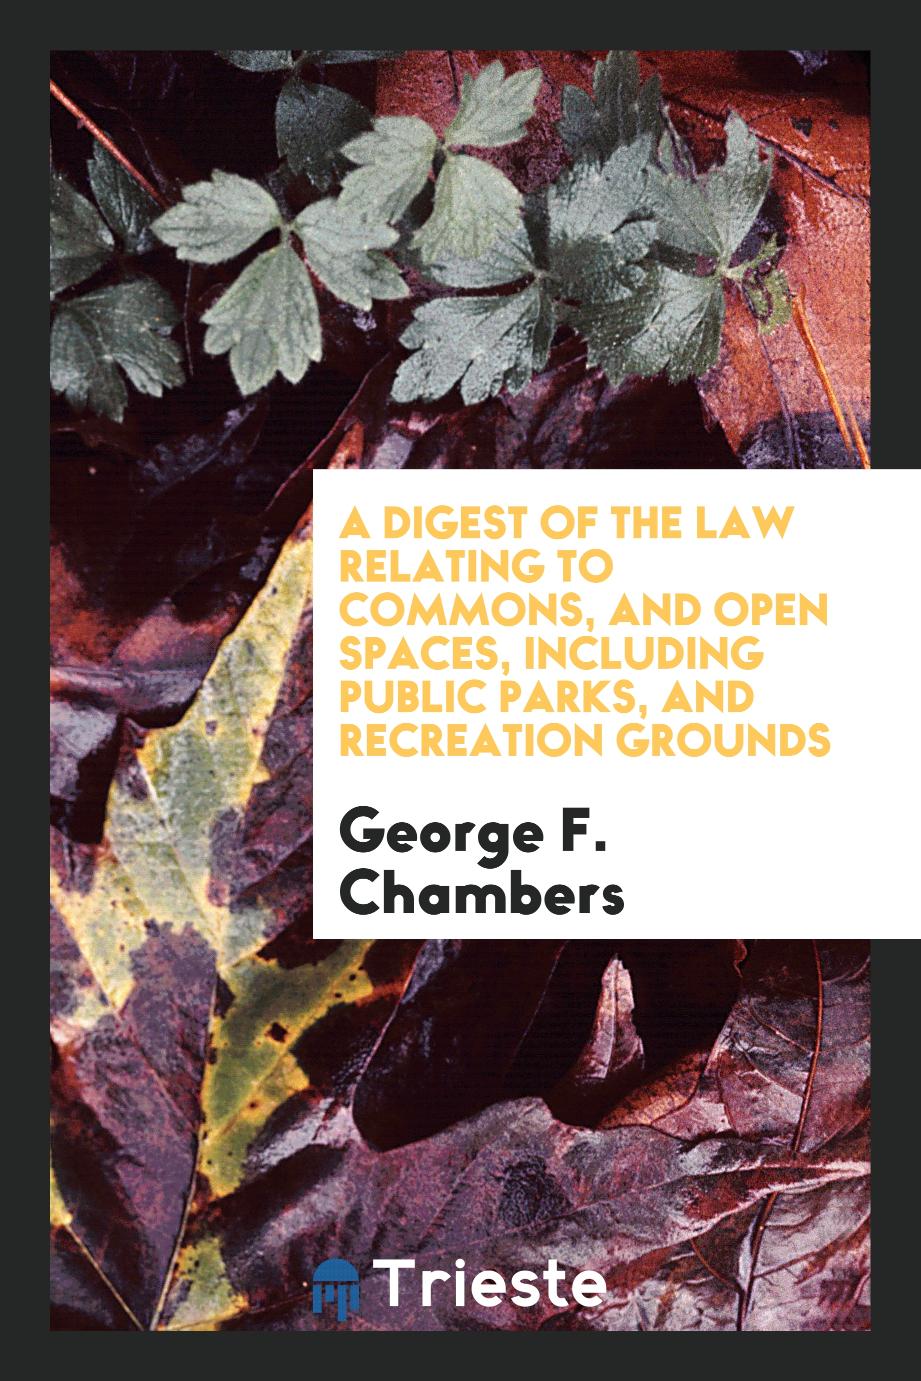 A Digest of the Law Relating to Commons, and Open Spaces, Including Public Parks, and recreation grounds